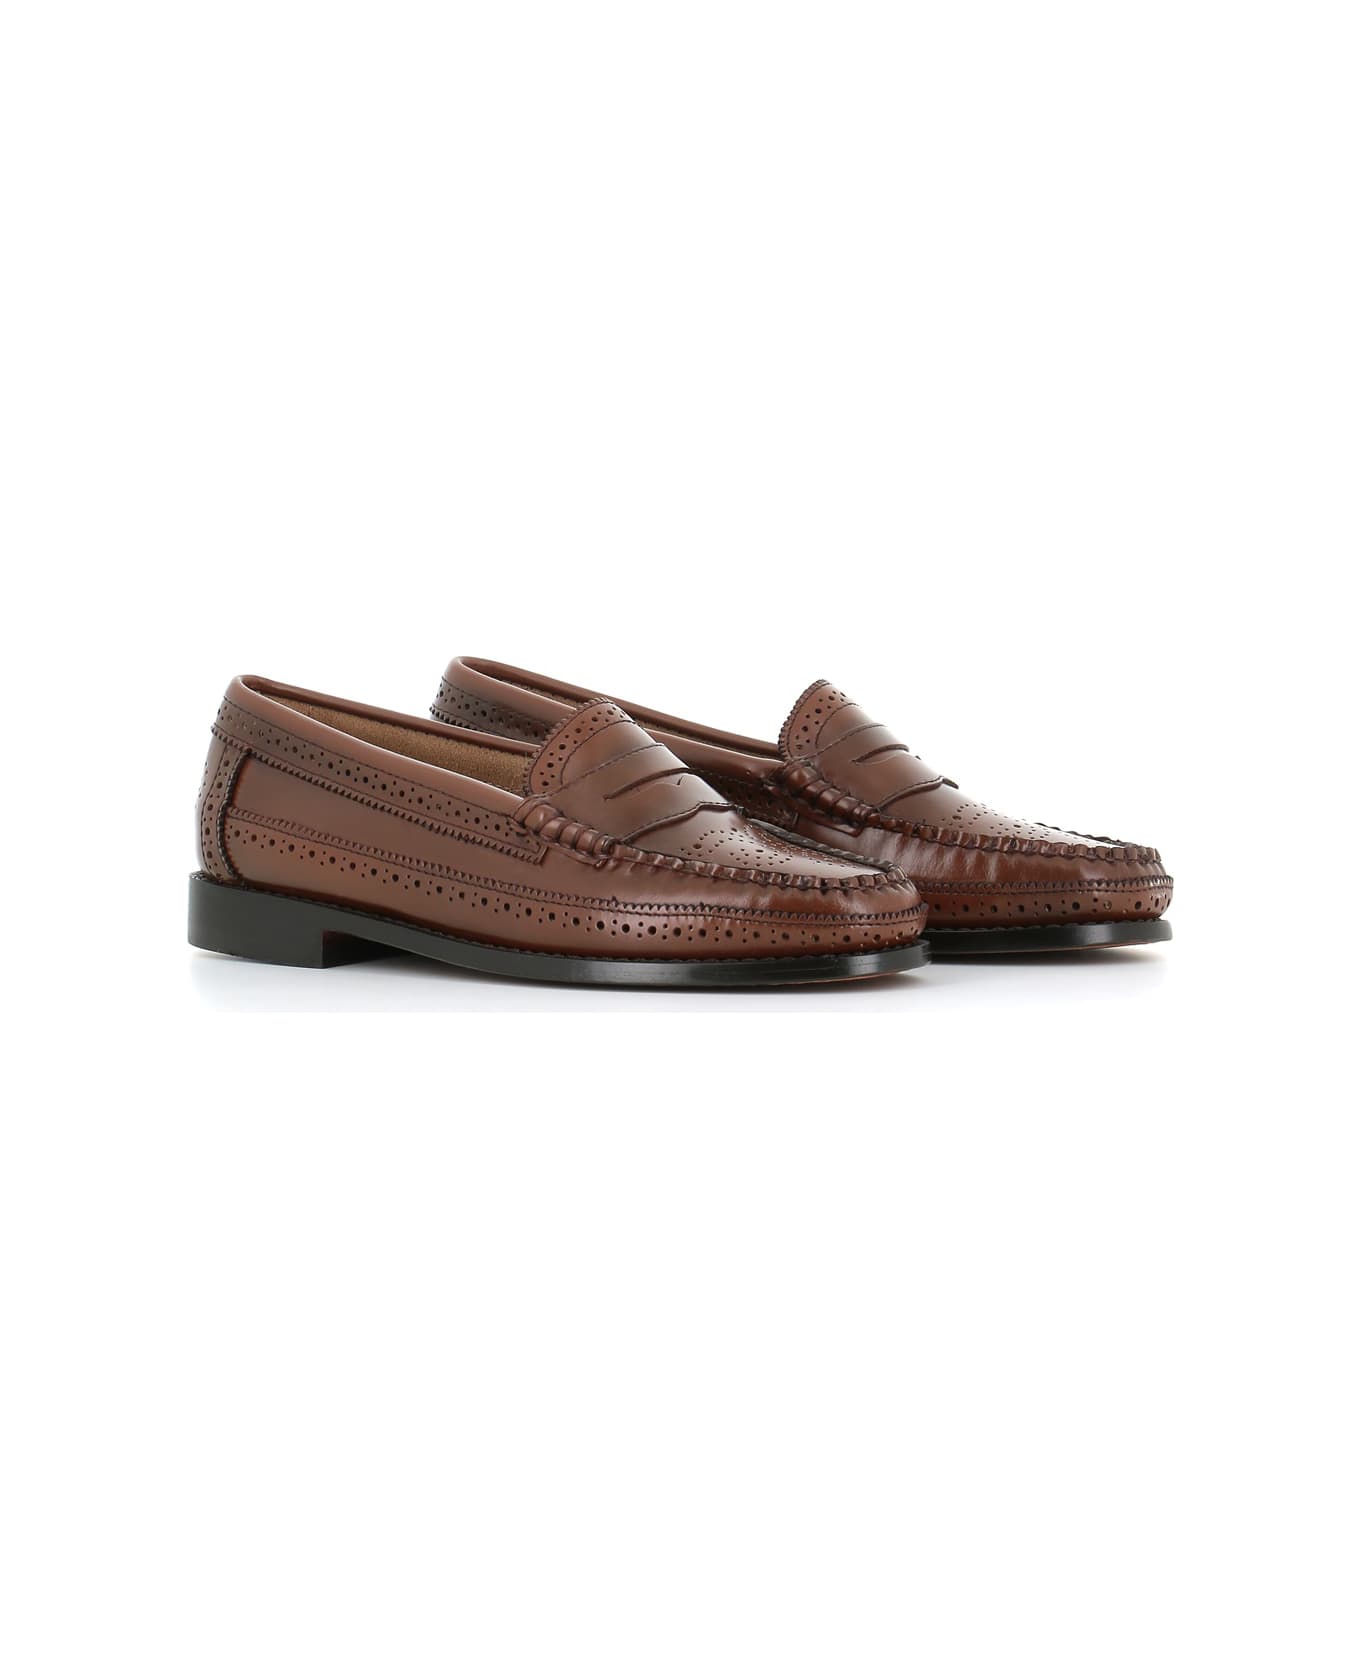 G.H.Bass & Co. Penny Brogues Loafer - Cognac フラットシューズ